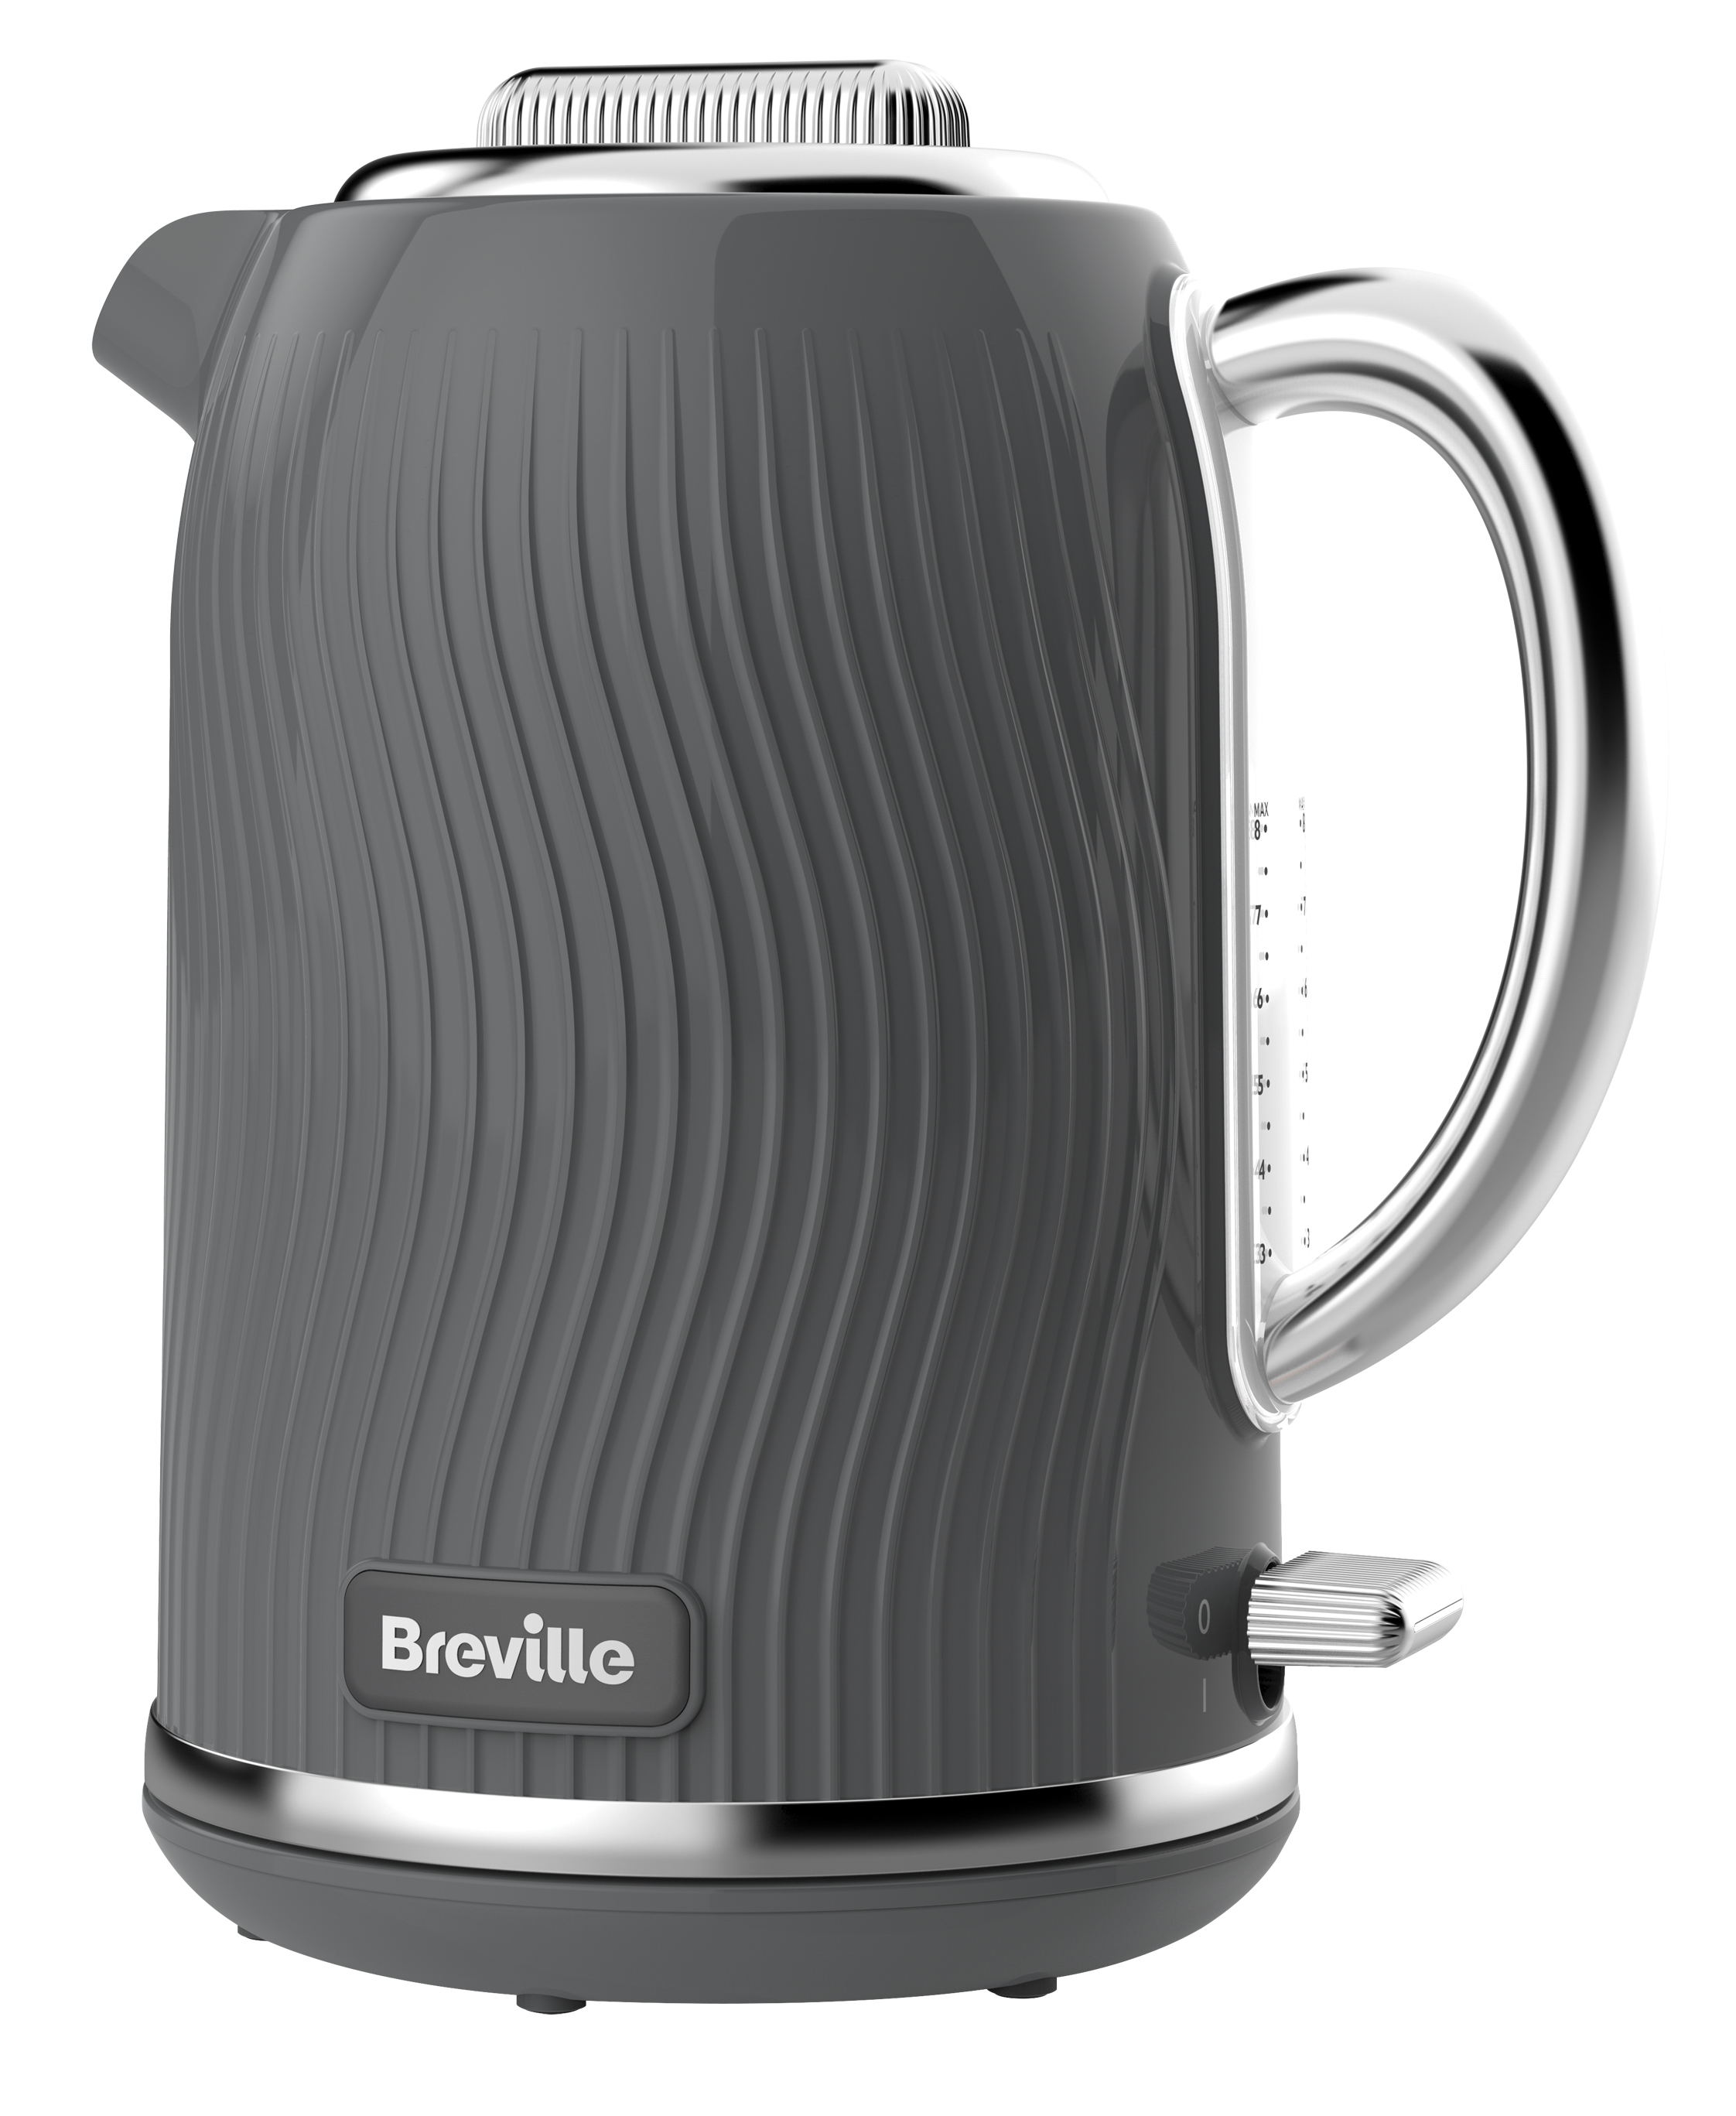 Breville Breville Flow Collection Jug Kettle Gloss Finish 3000 W 1.7 Litres Grey G32 